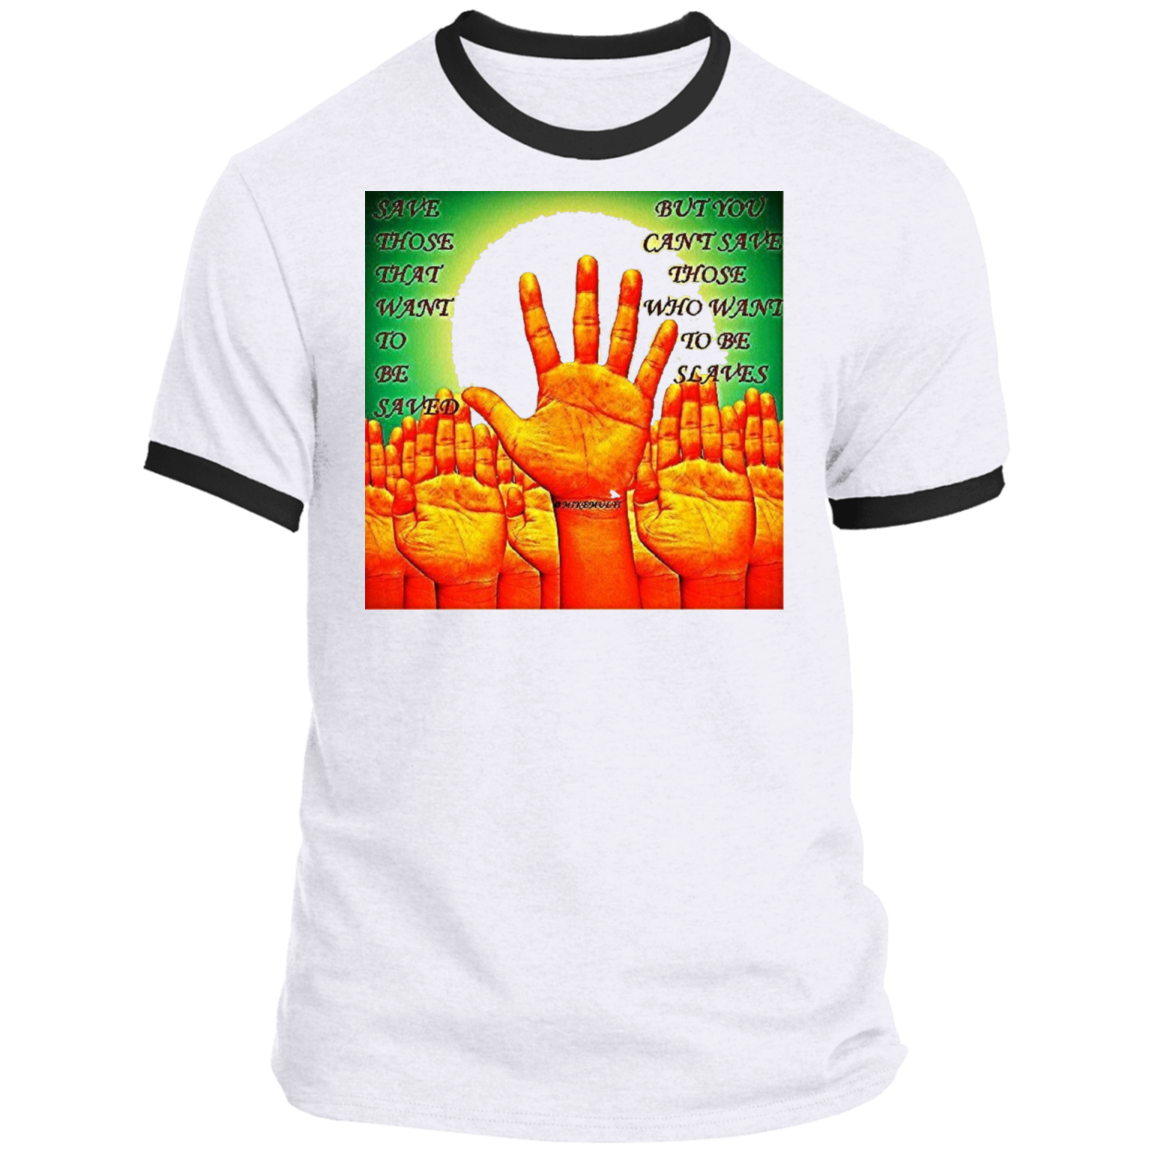 Save Those That Want To Be Saved - Men's Ringer Tee CustomCat